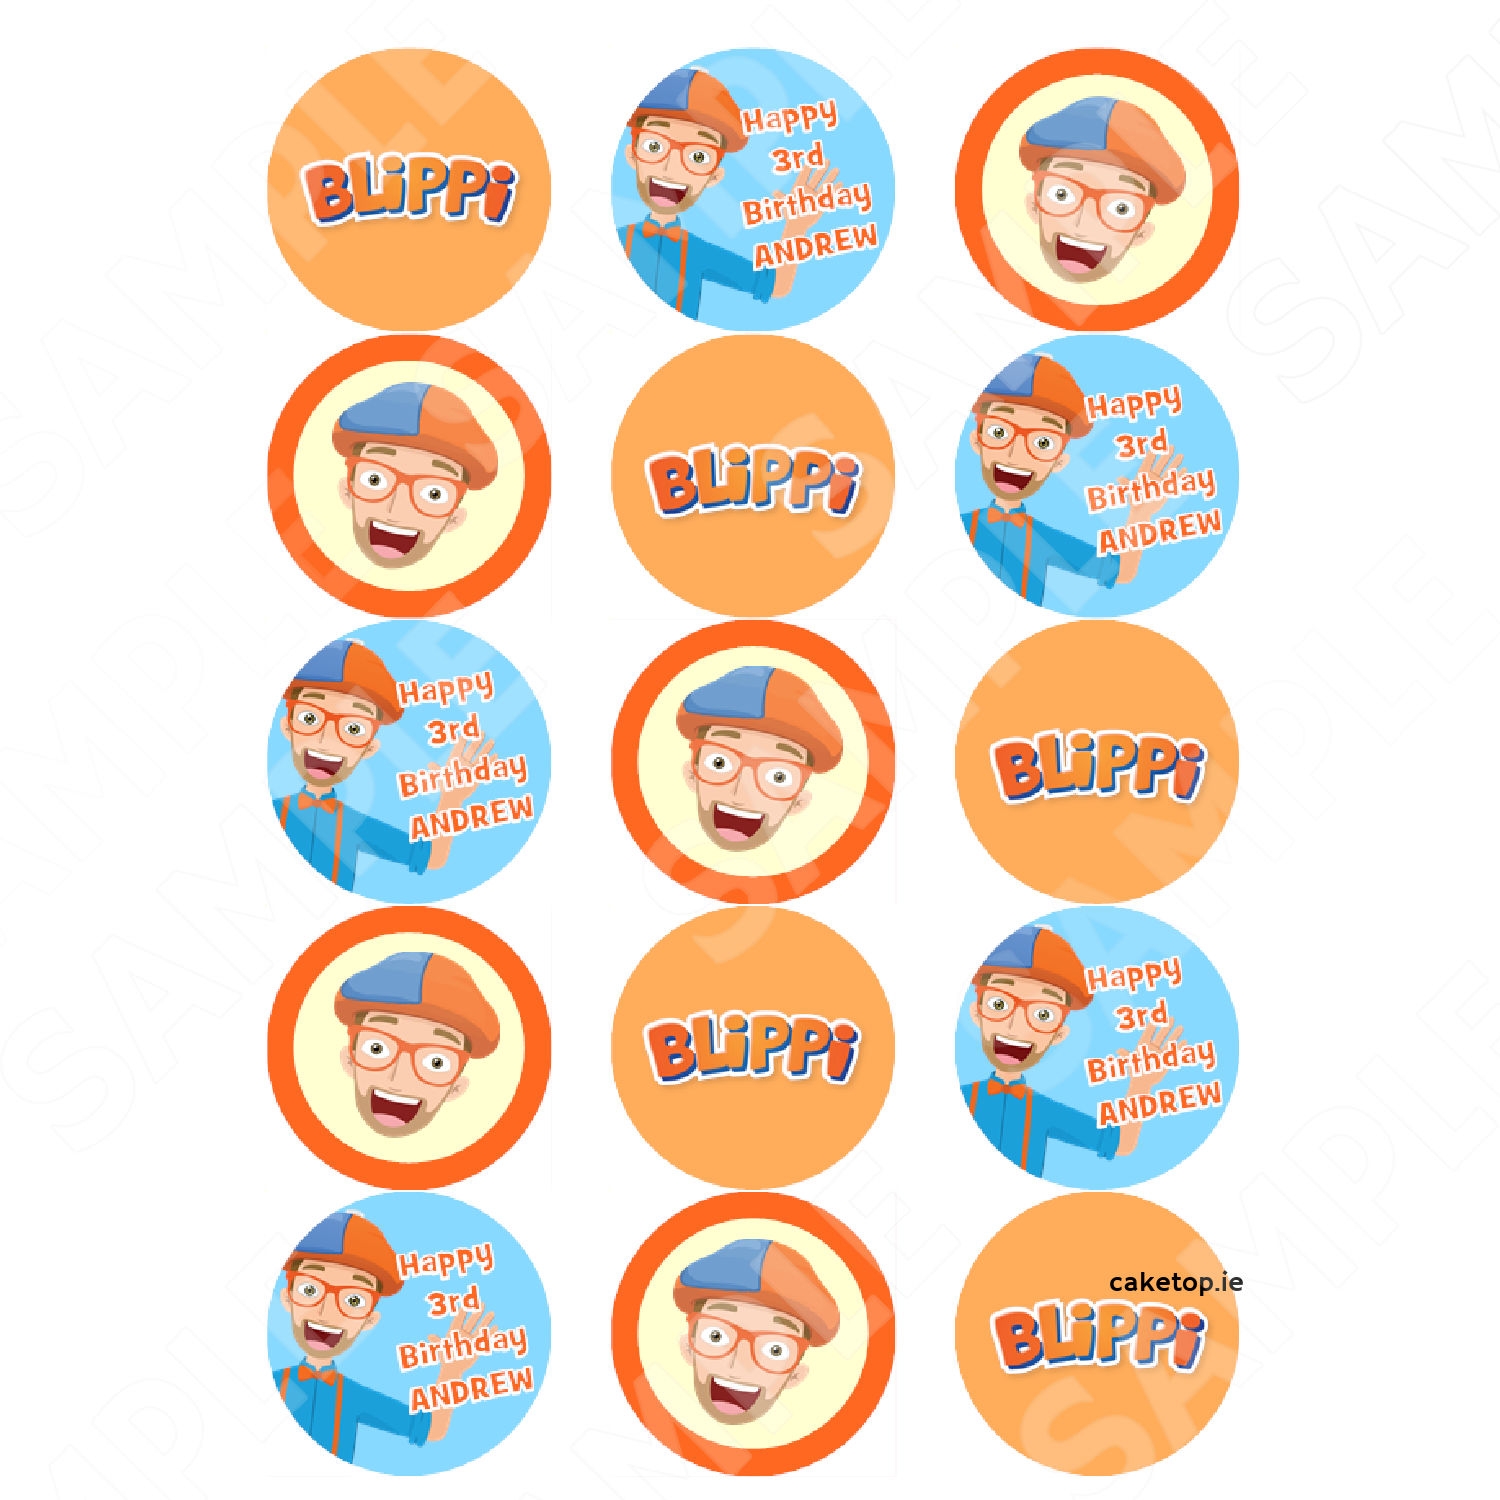 Blippi Edible Cake Toppers Edible Picture Caketop ie